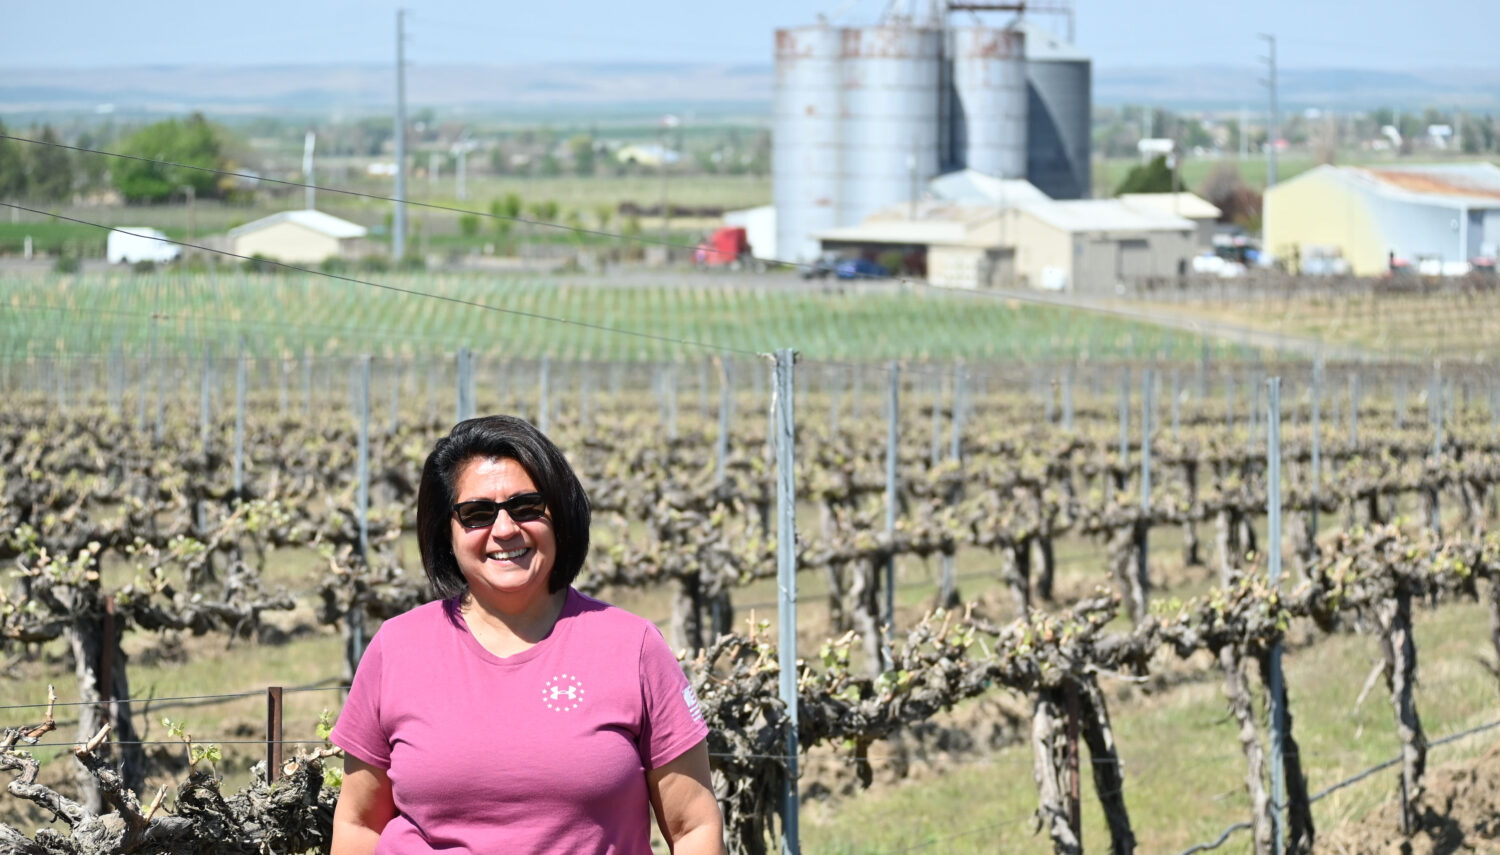 A woman in a pink shirt and sunglasses stands with short dark hair in front of vines without leaves, large cylindrical agricultural buildings are in the background